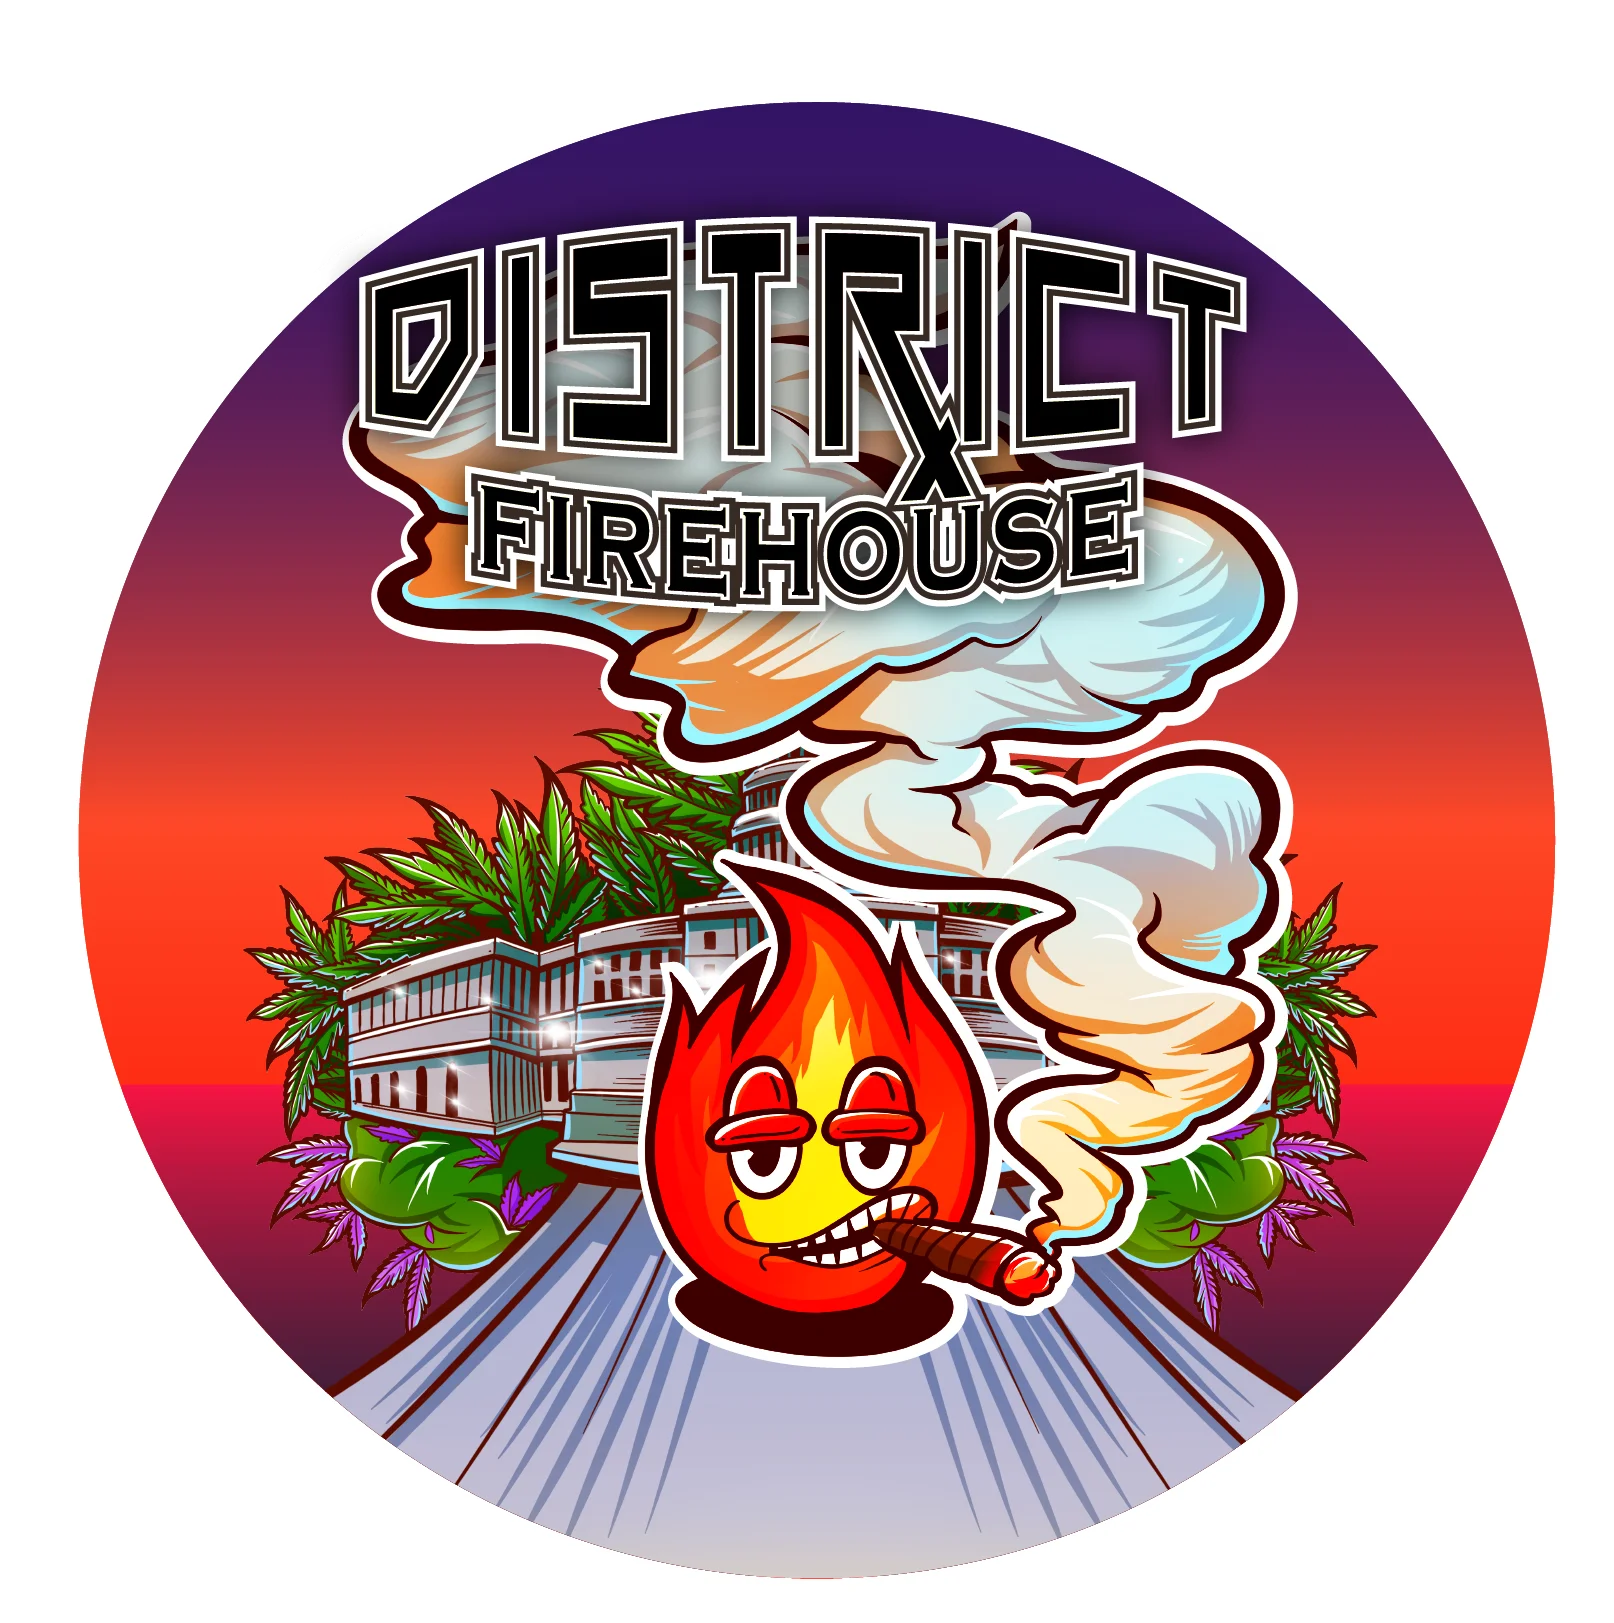 District Firehouse